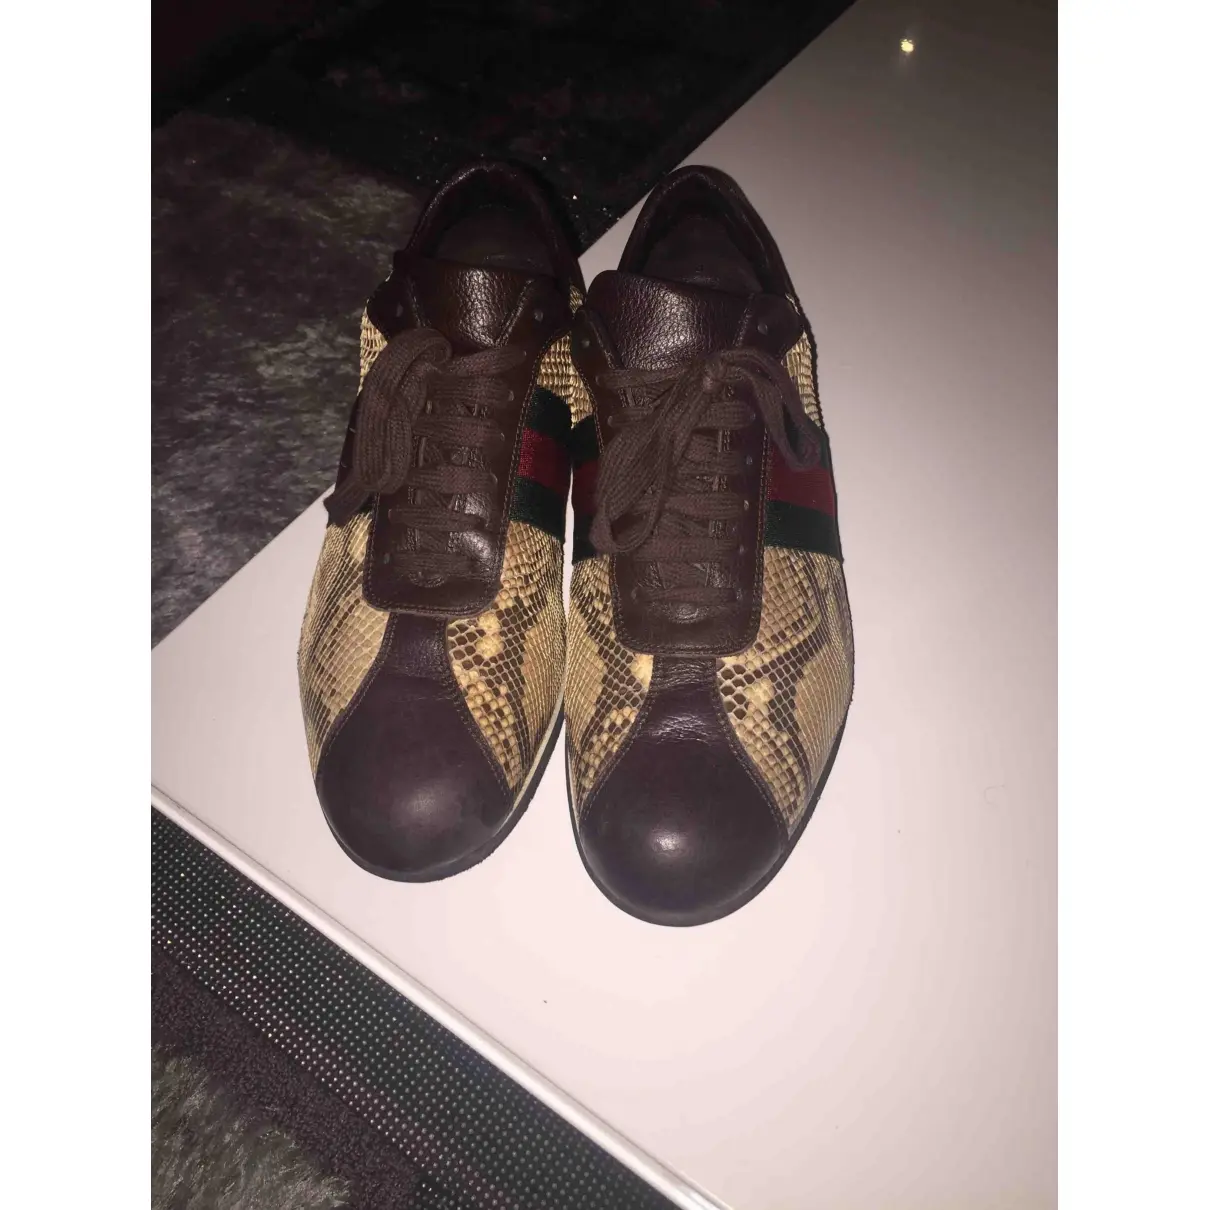 Gucci Python low trainers for sale